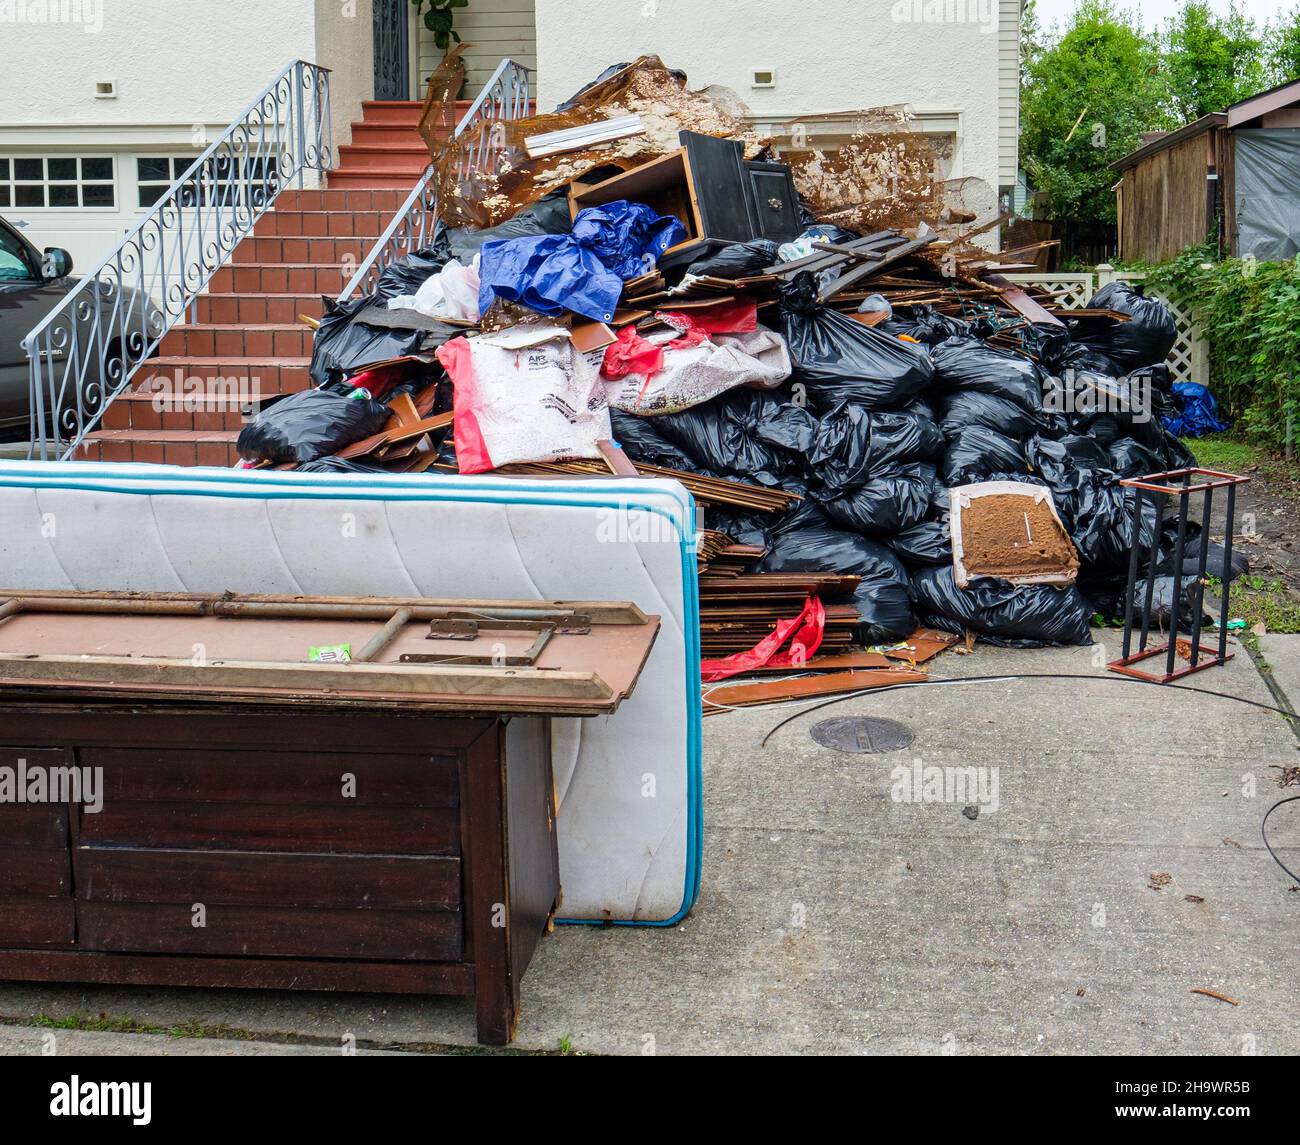 NEW ORLEANS, LA, USA -SEPTEMBER 22, 2021: Mountain of debris in front of house from cleanup of Hurricane Ida's wrath Stock Photo